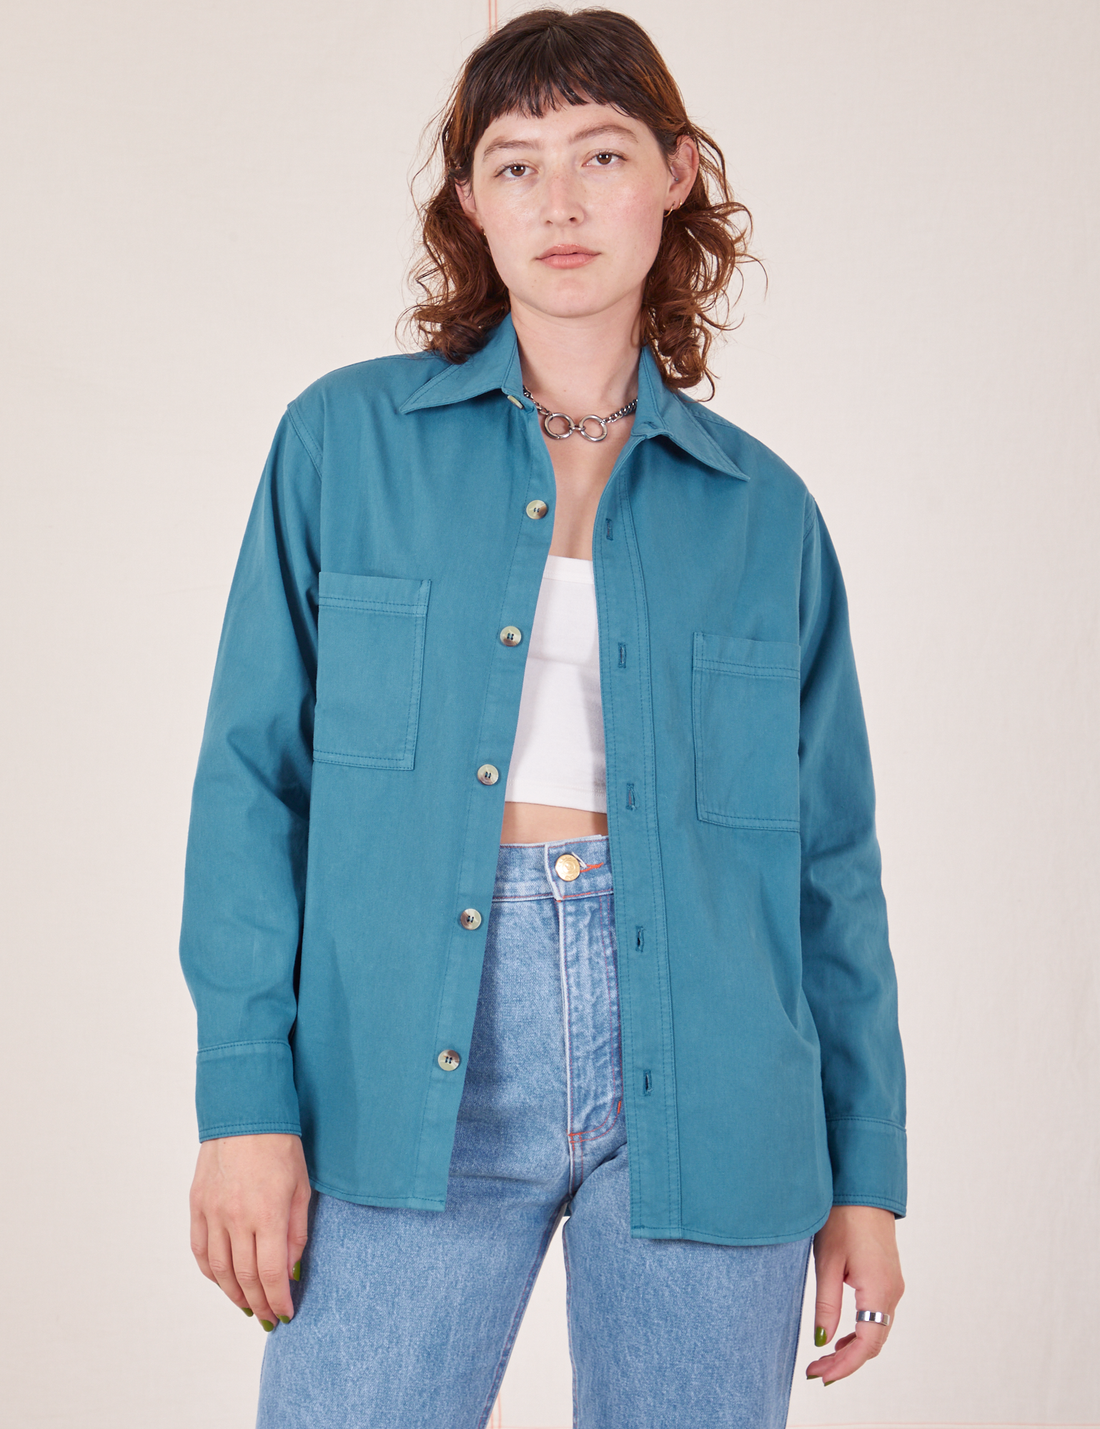 Alex is wearing size P Oversize Overshirt in Marine Blue